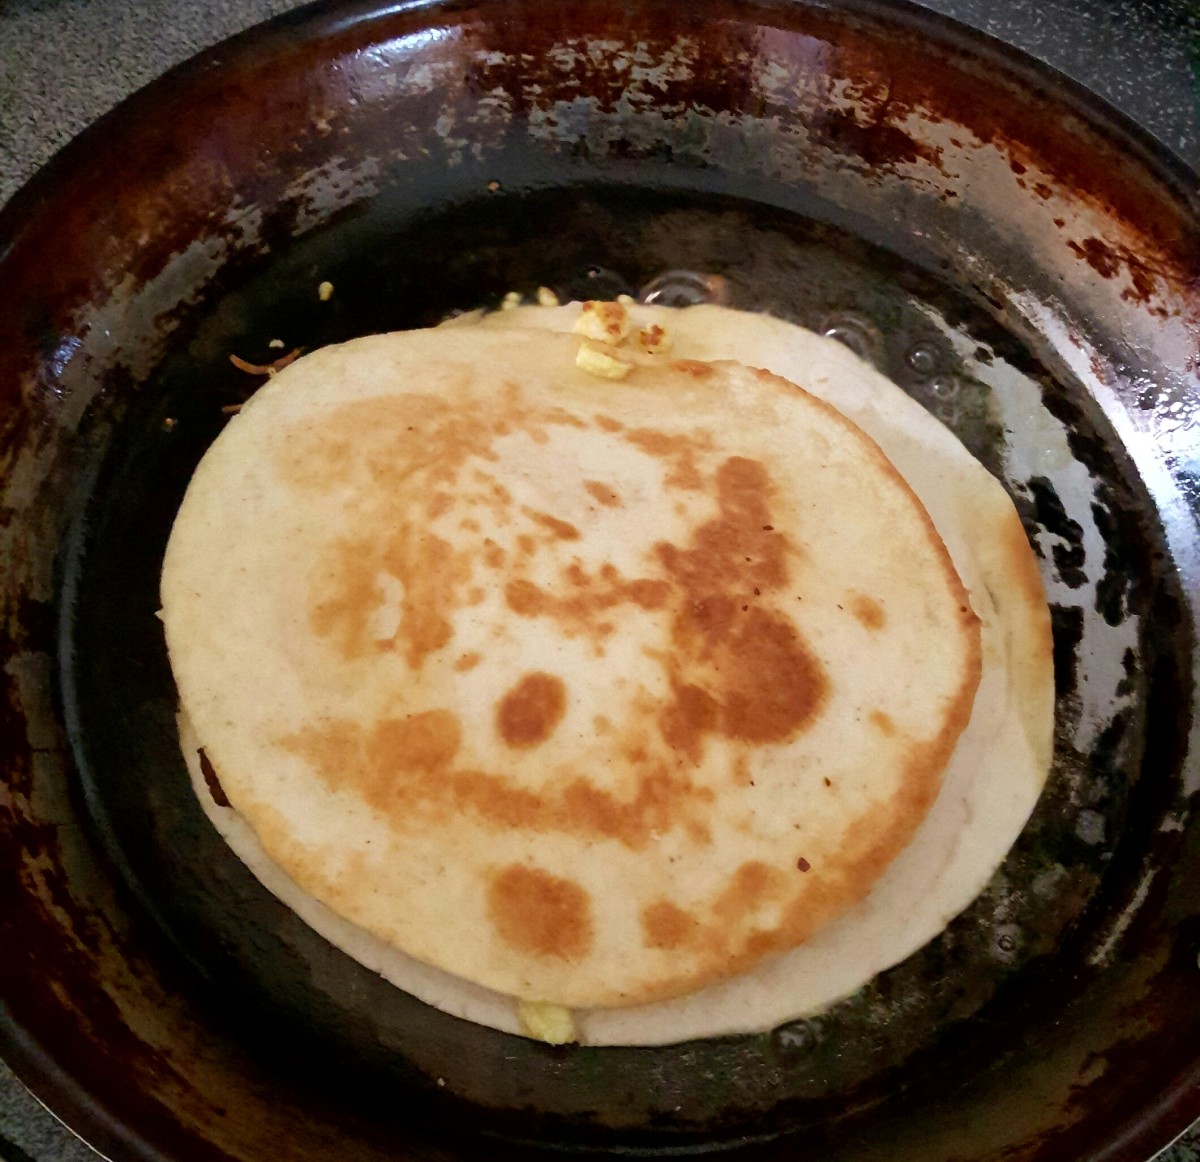 After cooking for a few minutes, flip your quesadilla. Continue cooking for a few more minutes to brown the other side.